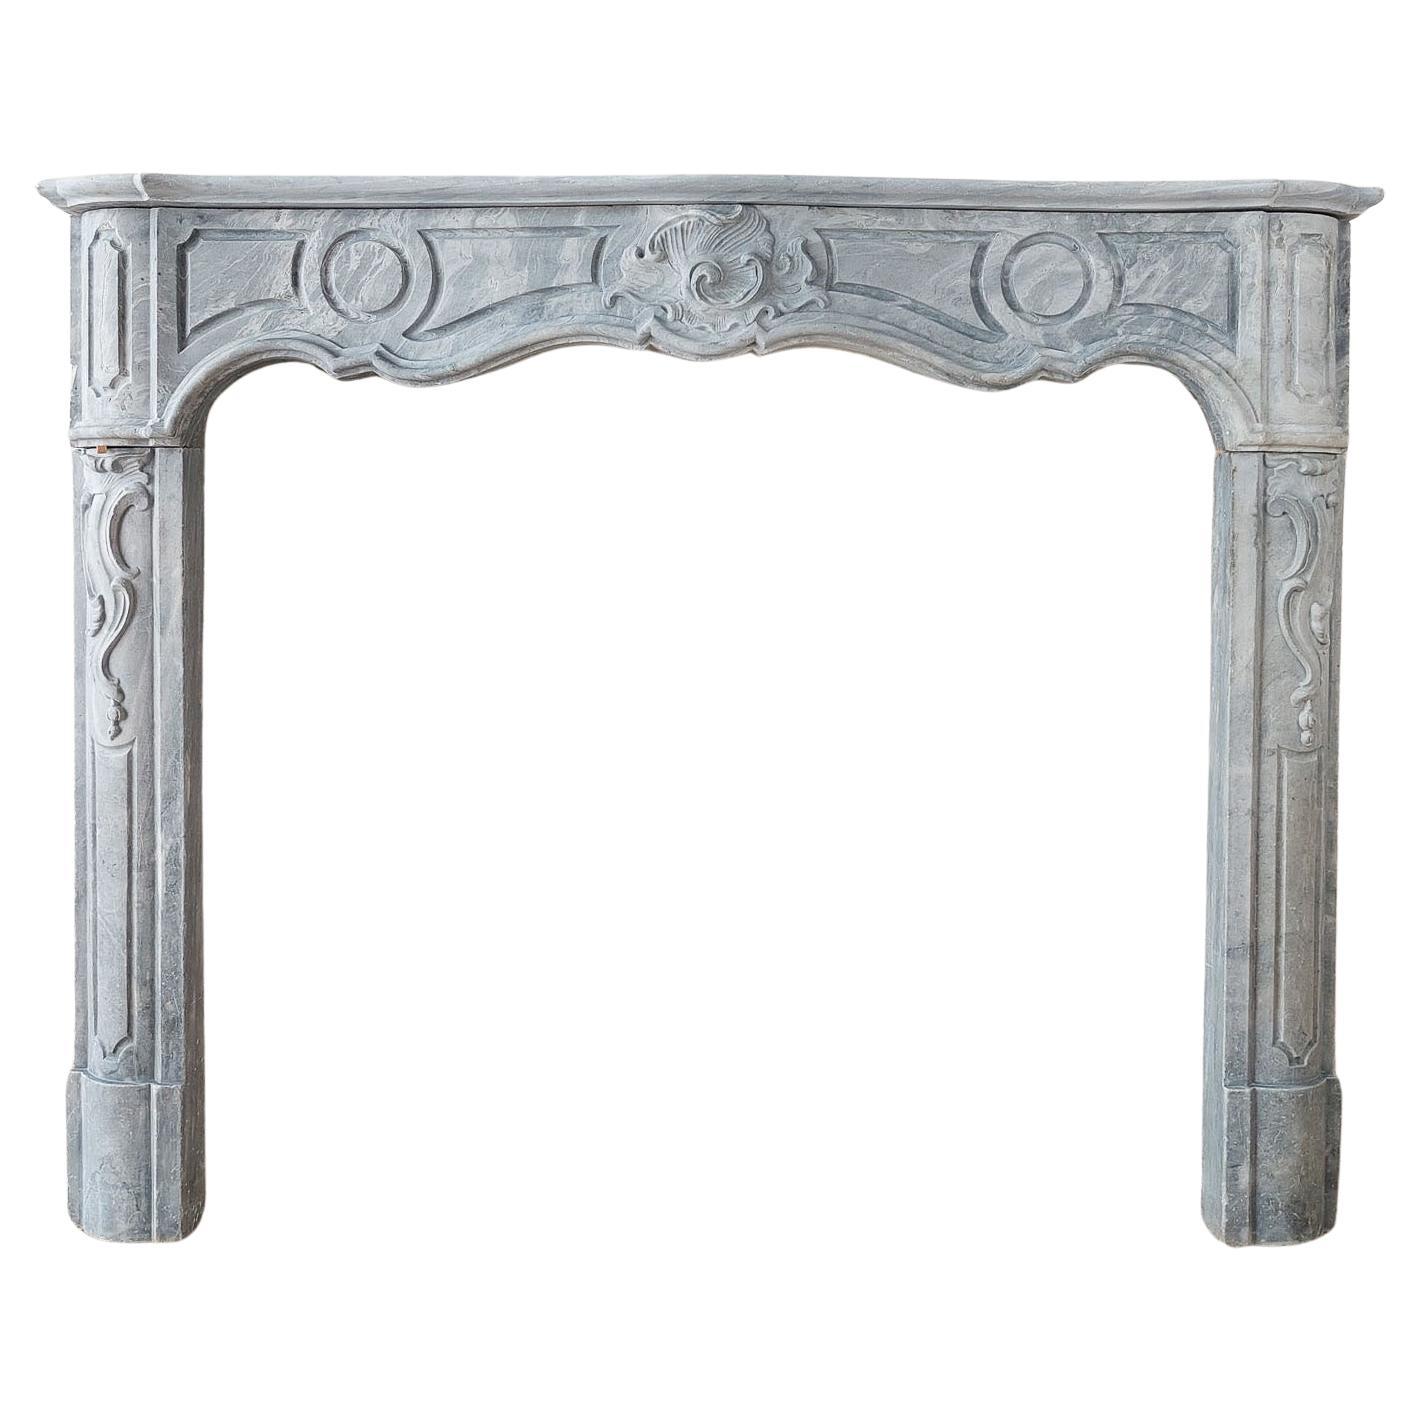 18th century Dutch Blue Turquin marble mantelpiece in Régence Style